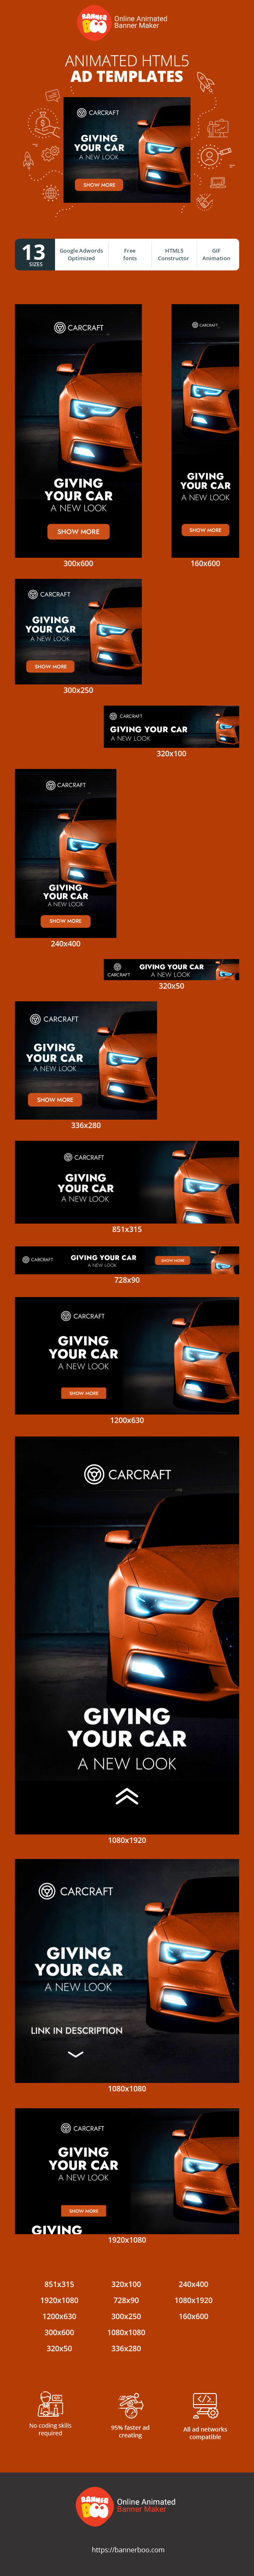 Banner ad template — Giving Your Car A New Look — Transport